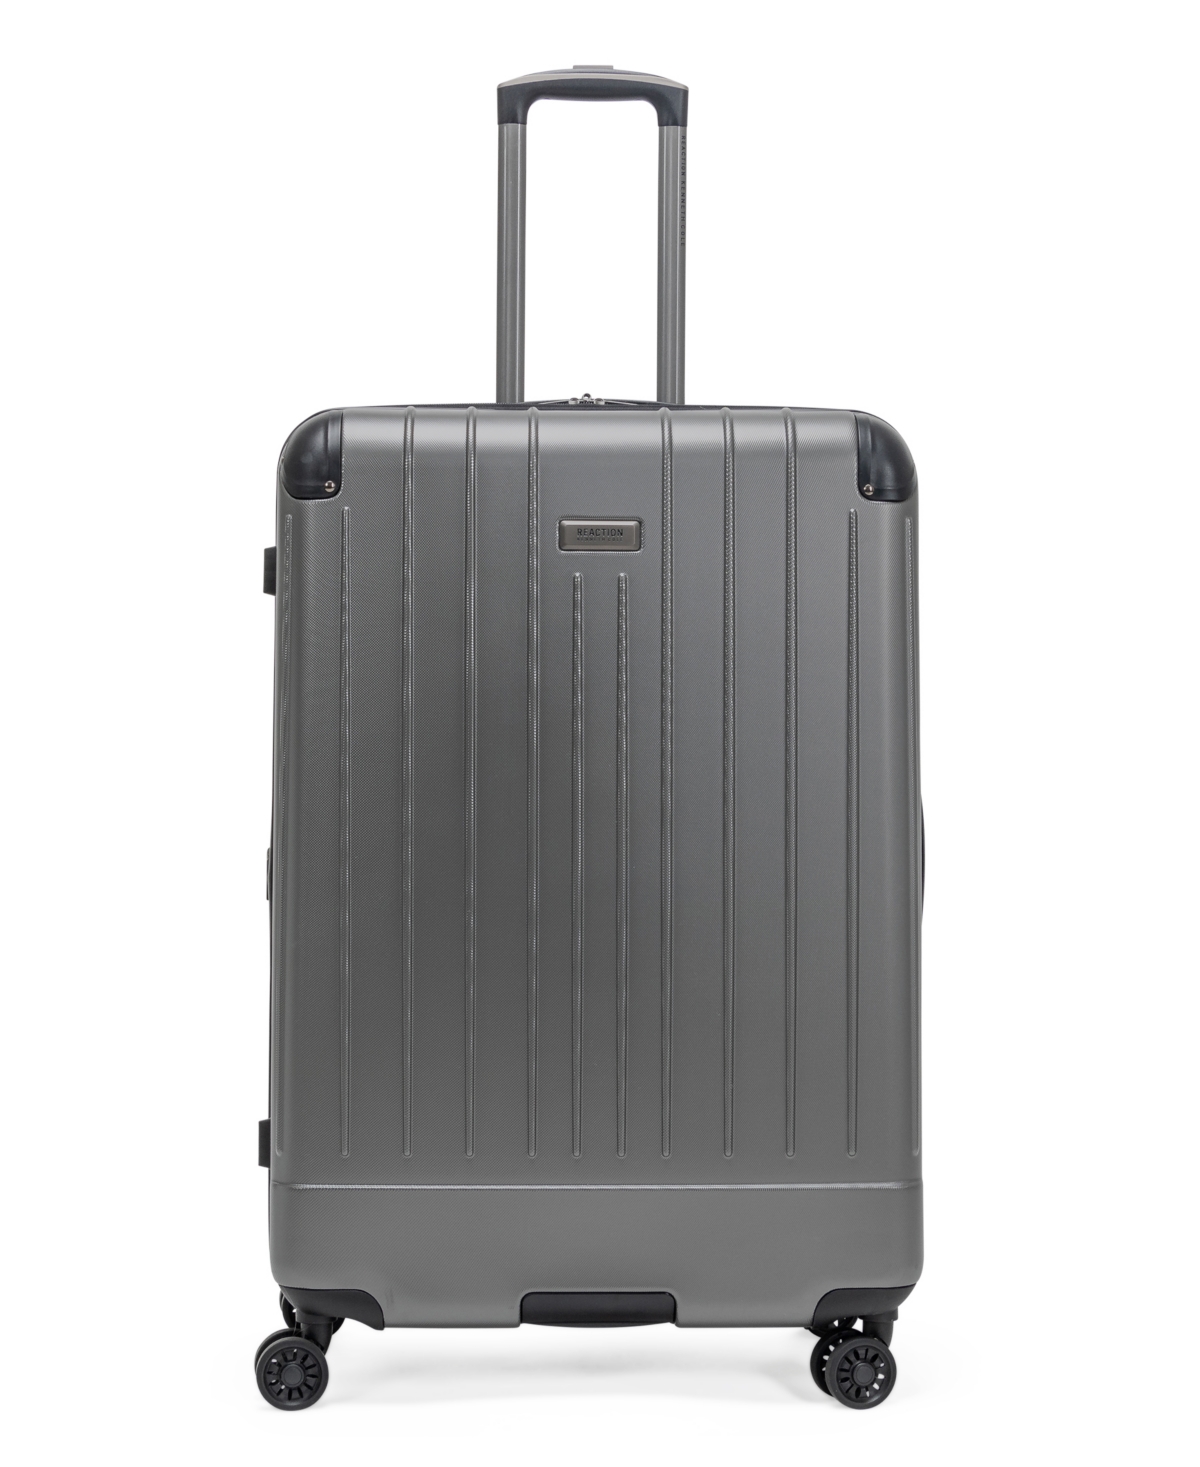 Flying Axis 28" Hardside Expandable Checked Luggage - Silver